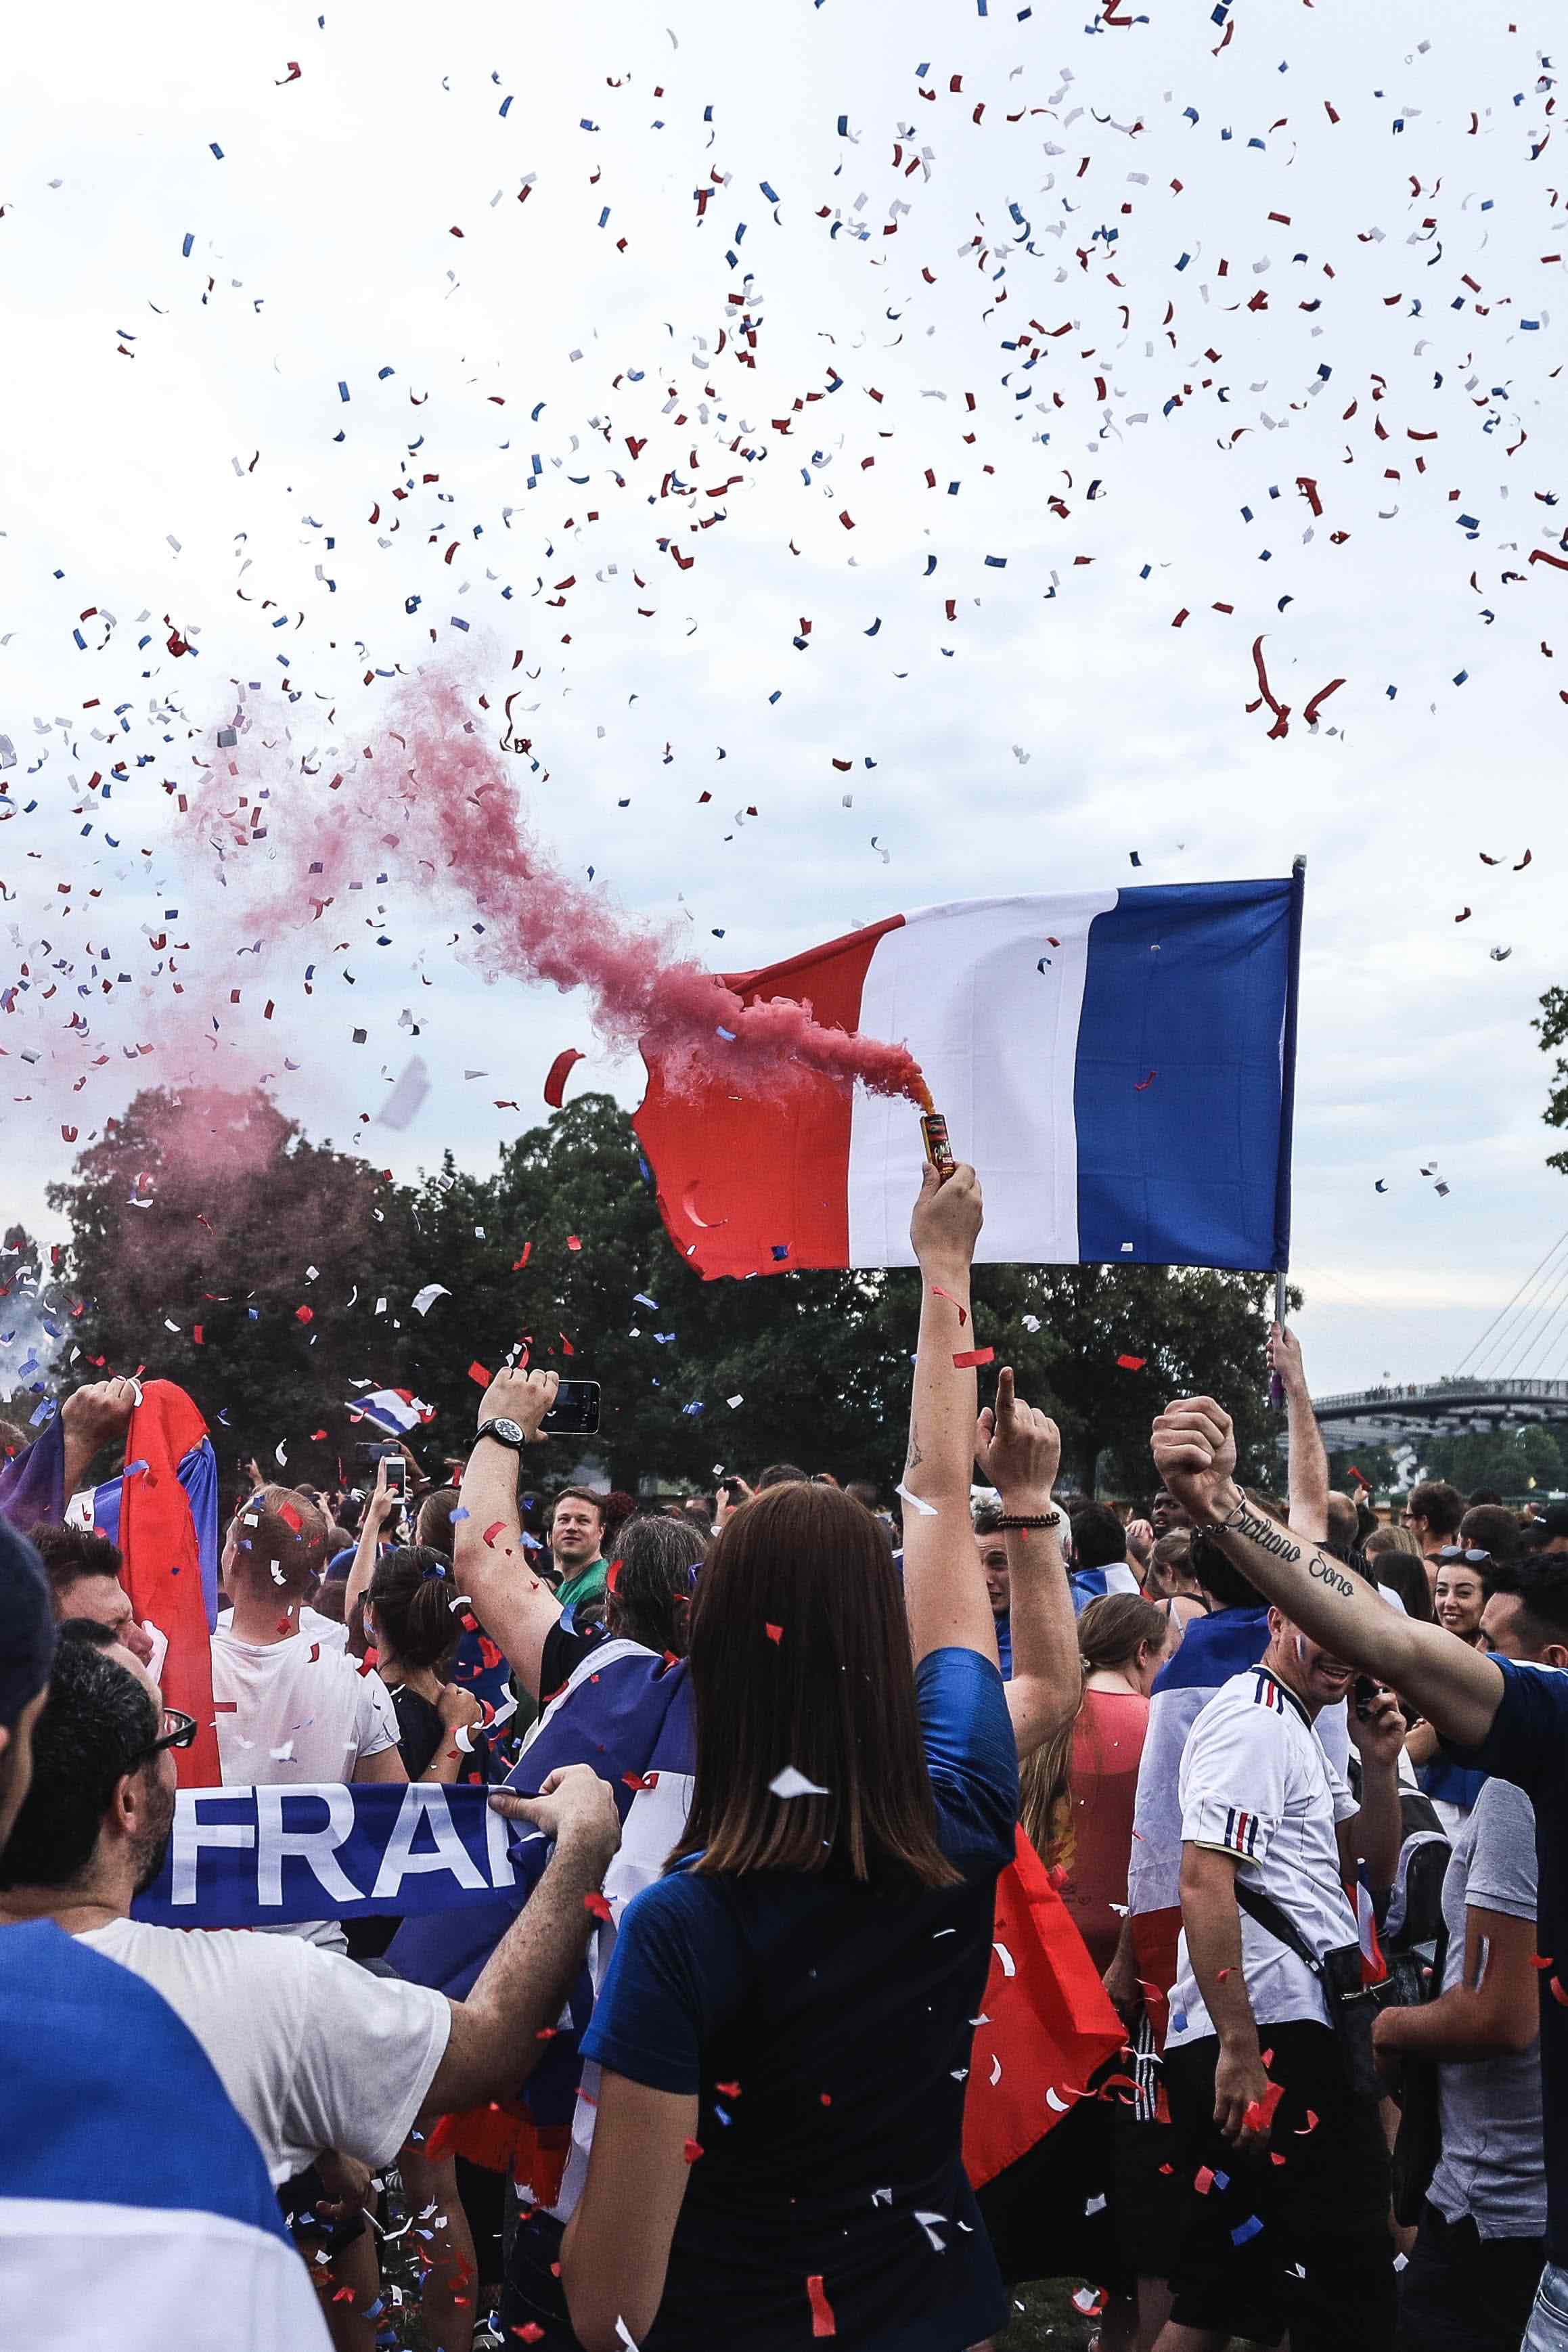 Celebrations in France after winning the World Cup